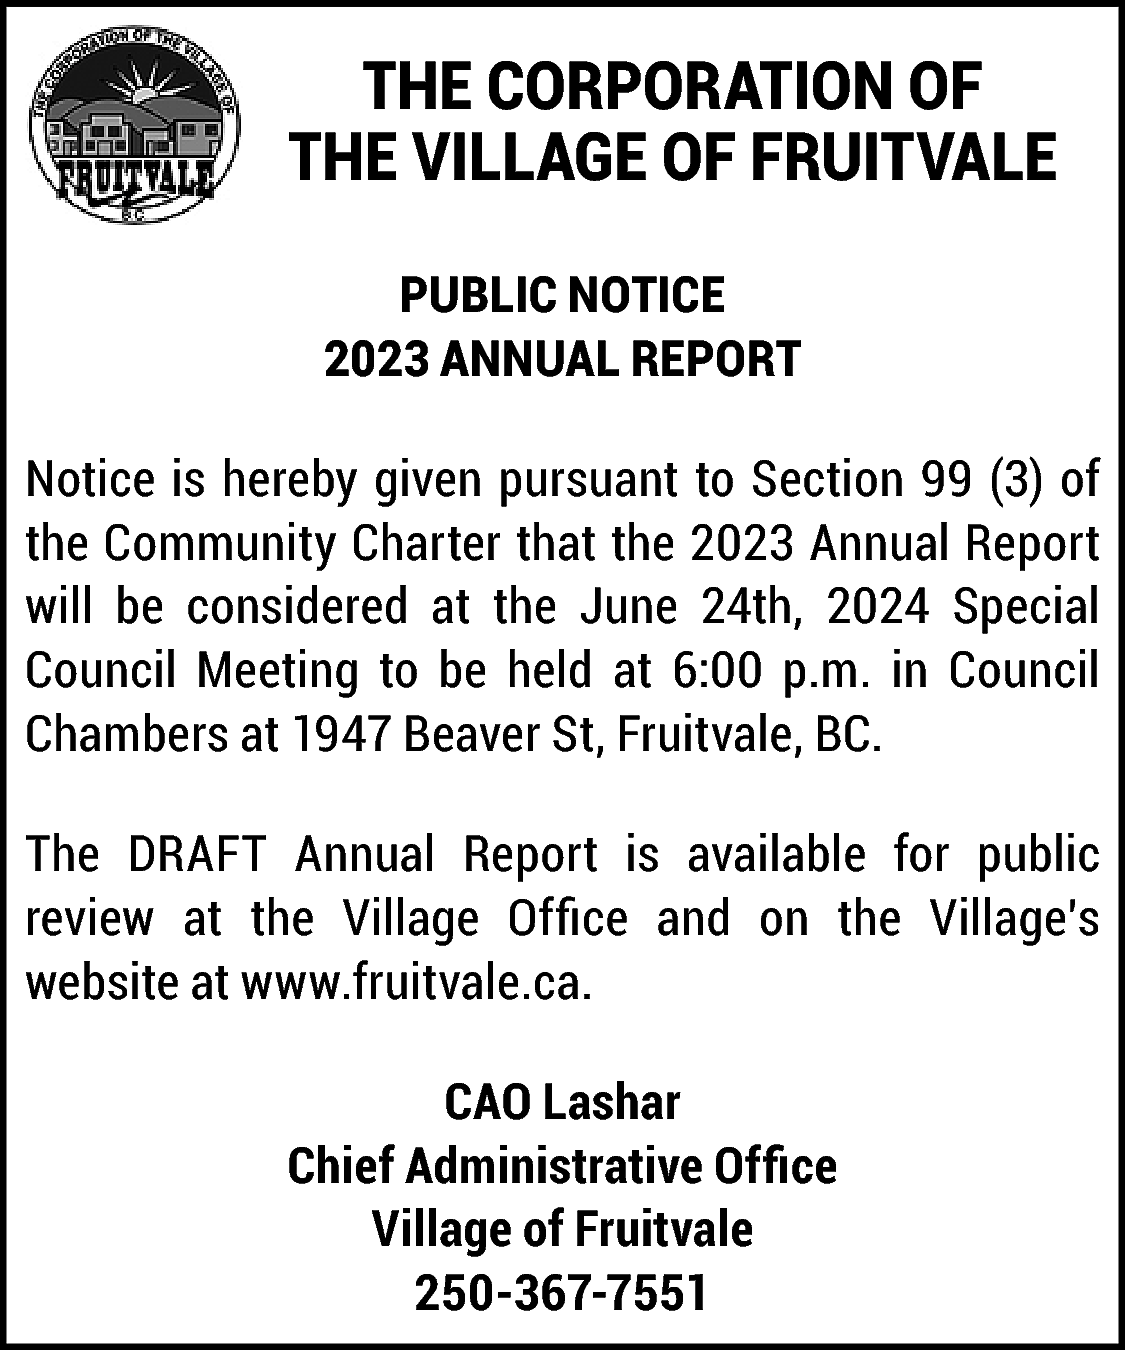 THE CORPORATION OF <br>THE VILLAGE  THE CORPORATION OF  THE VILLAGE OF FRUITVALE  PUBLIC NOTICE  2023 ANNUAL REPORT  Notice is hereby given pursuant to Section 99 (3) of  the Community Charter that the 2023 Annual Report  will be considered at the June 24th, 2024 Special  Council Meeting to be held at 6:00 p.m. in Council  Chambers at 1947 Beaver St, Fruitvale, BC.  The DRAFT Annual Report is available for public  review at the Village Office and on the Village’s  website at www.fruitvale.ca.  CAO Lashar  Chief Administrative Office  Village of Fruitvale  250-367-7551    